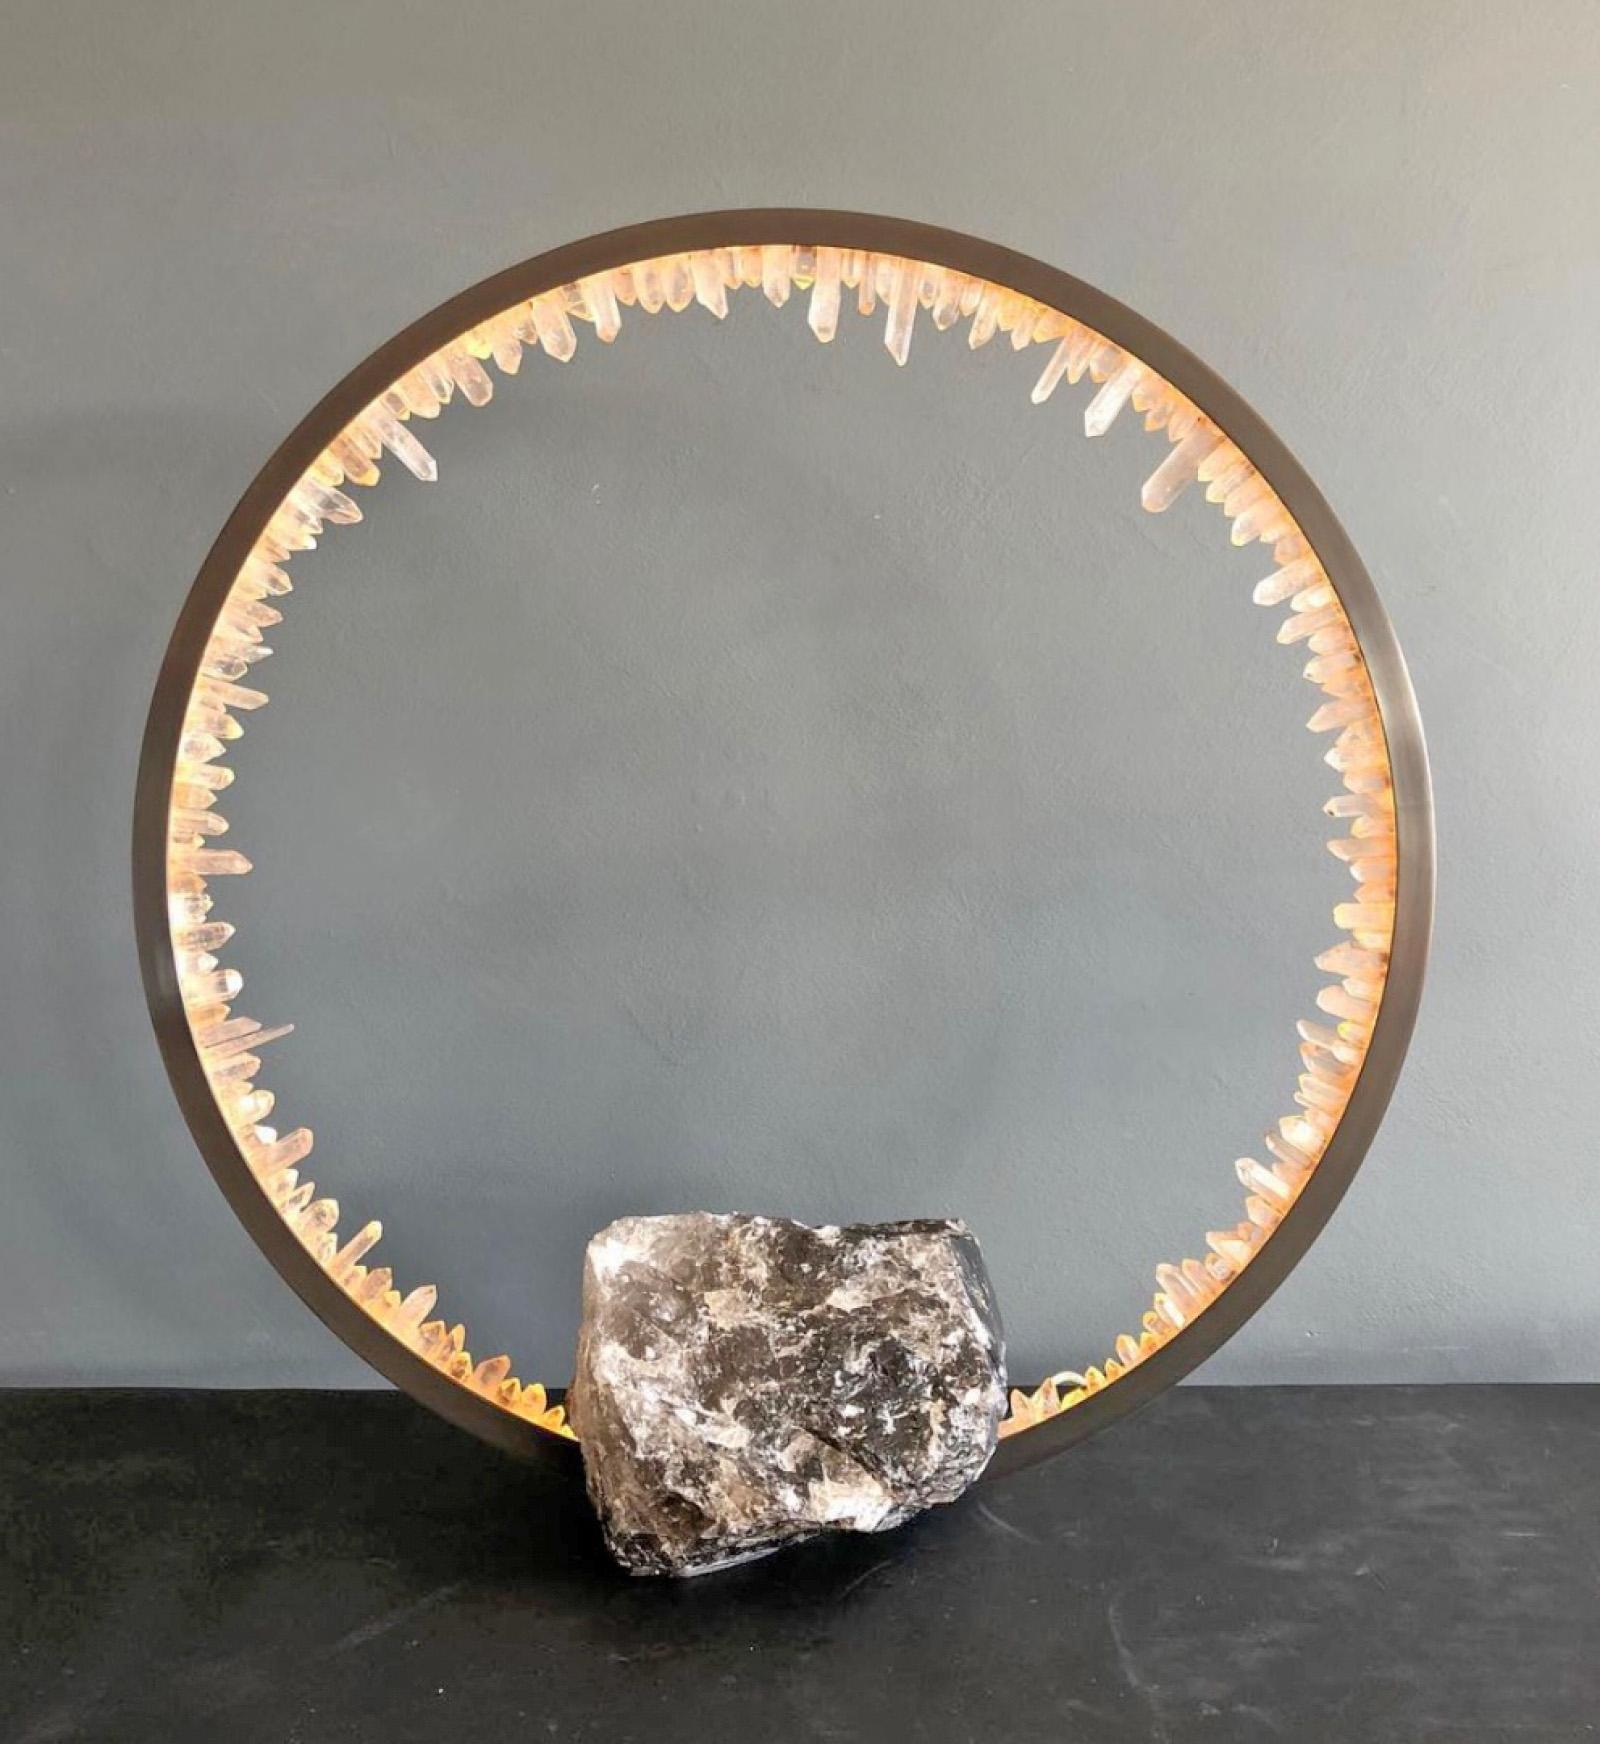 Brass and quartz crystal table light sculpture - Prometheus IV Table Lamp Quartz Base by Christopher Boots.

Emanating luminescence from a minimalist form, PROMETHEUS IV TABLE LAMP embodies the cyclical nature of existence.

Looking through